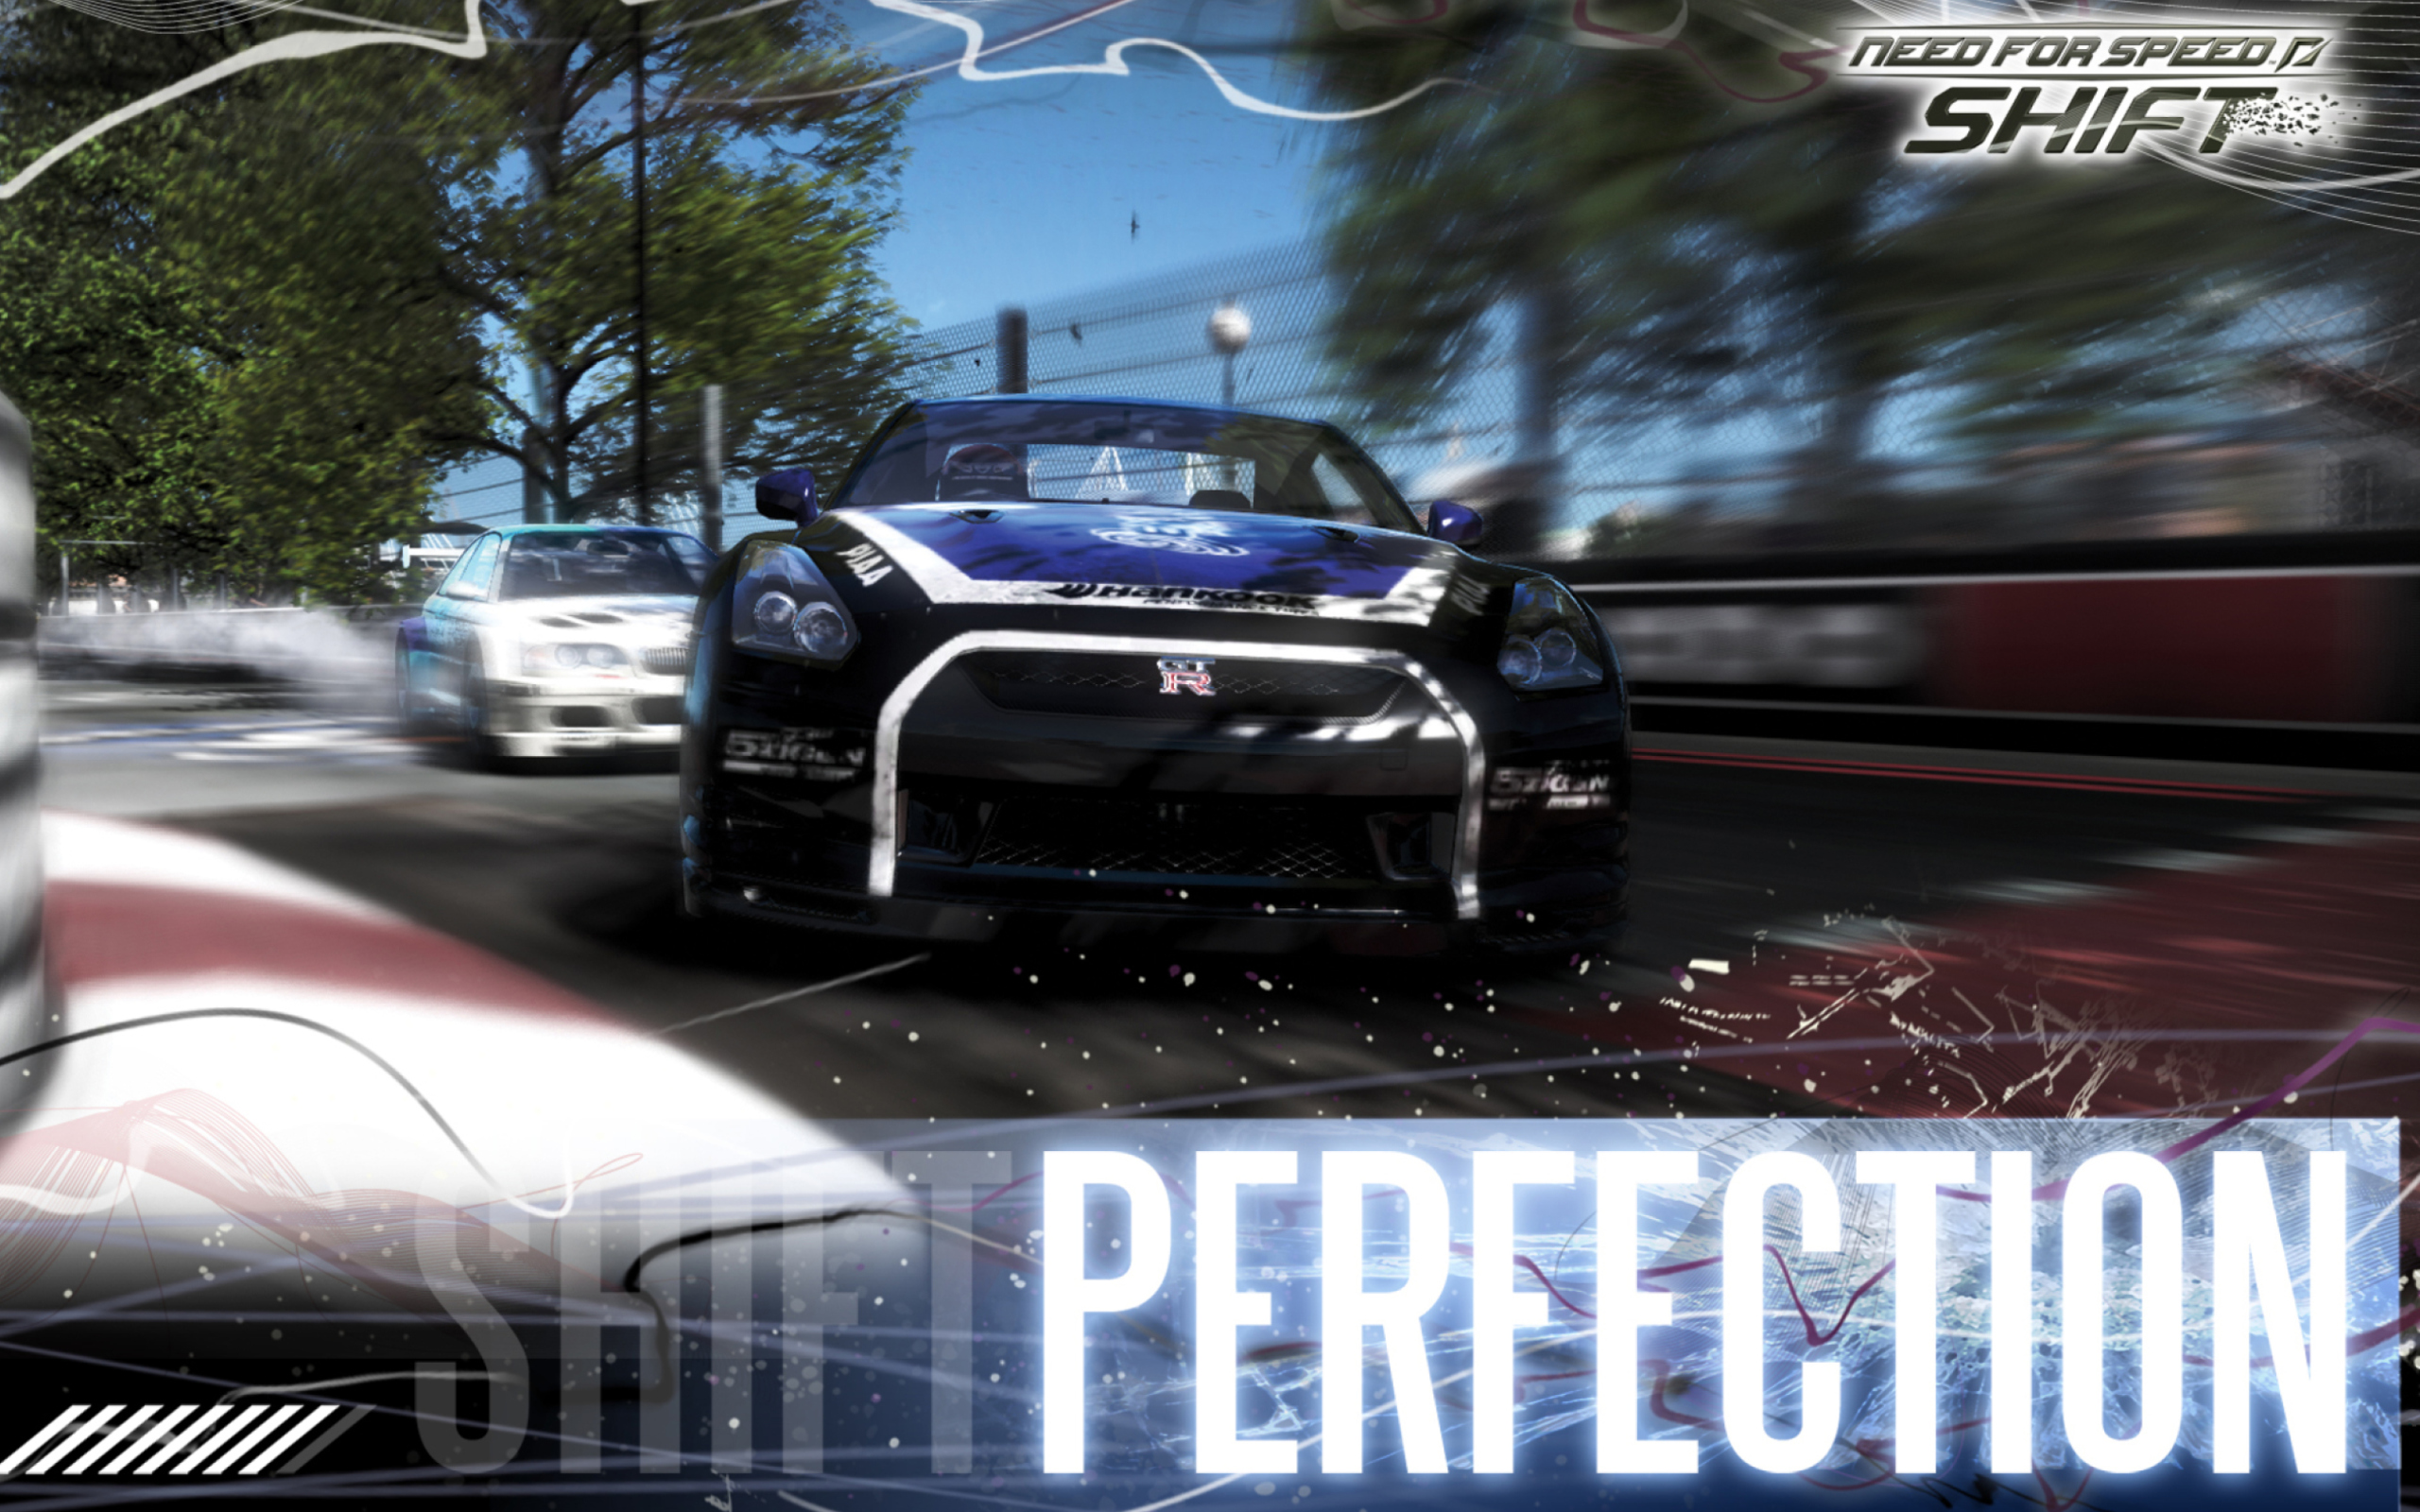 Need for Speed: Shift wallpaper 2560x1600